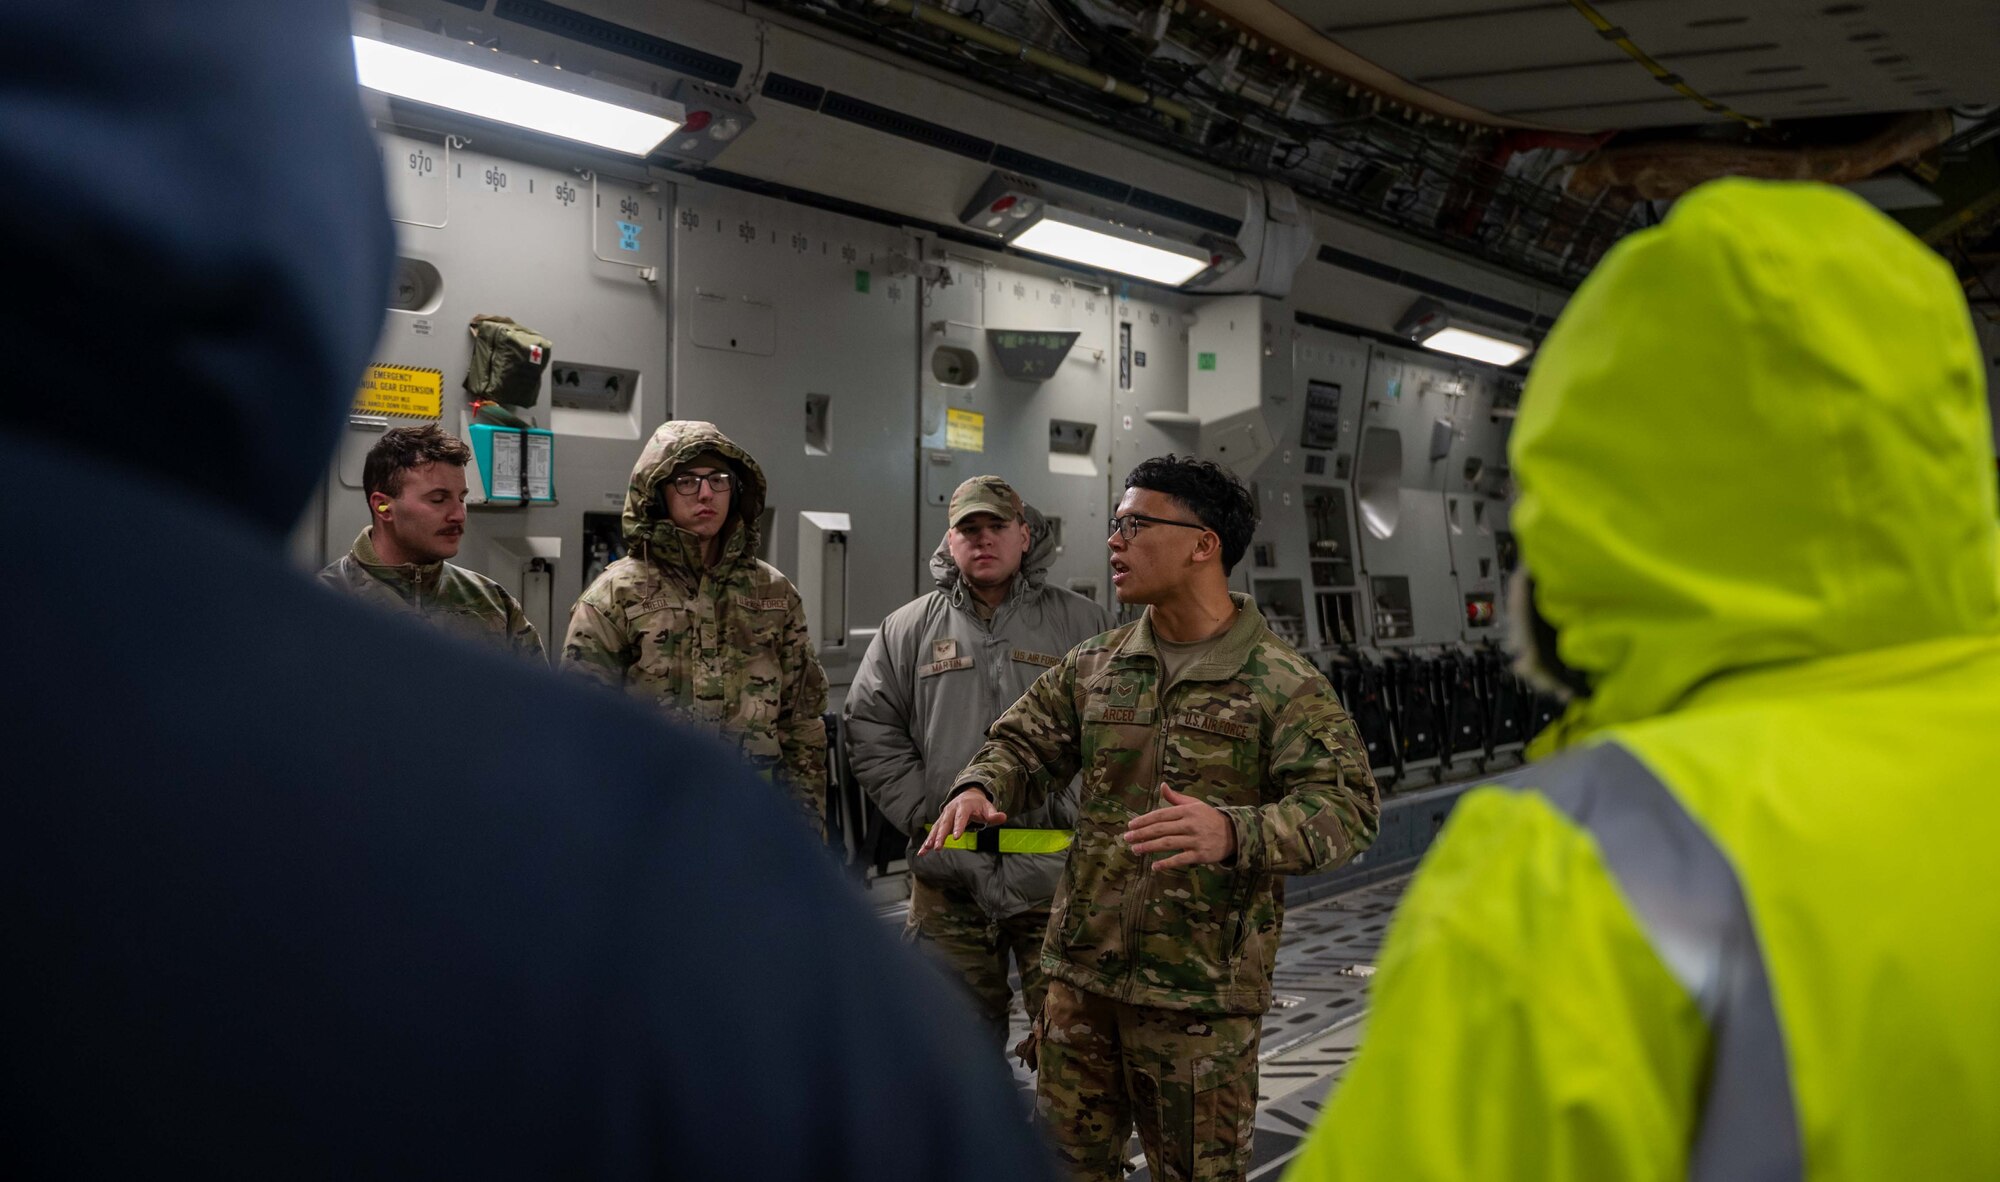 Senior Airman Frankie Arceo, 3rd Airlift Squadron loadmaster, gives a safety brief before loading cargo onto a C-17 Globemaster III during a foreign military sales mission at Dover Air Force Base, Delaware, Jan. 14, 2023. The C-17 transported a CH-47F Chinook helicopter to Torrejón Air Base, Spain as part of the Department of Defense’s FMS program. (U.S. Air Force photo by Senior Airman Faith Barron)